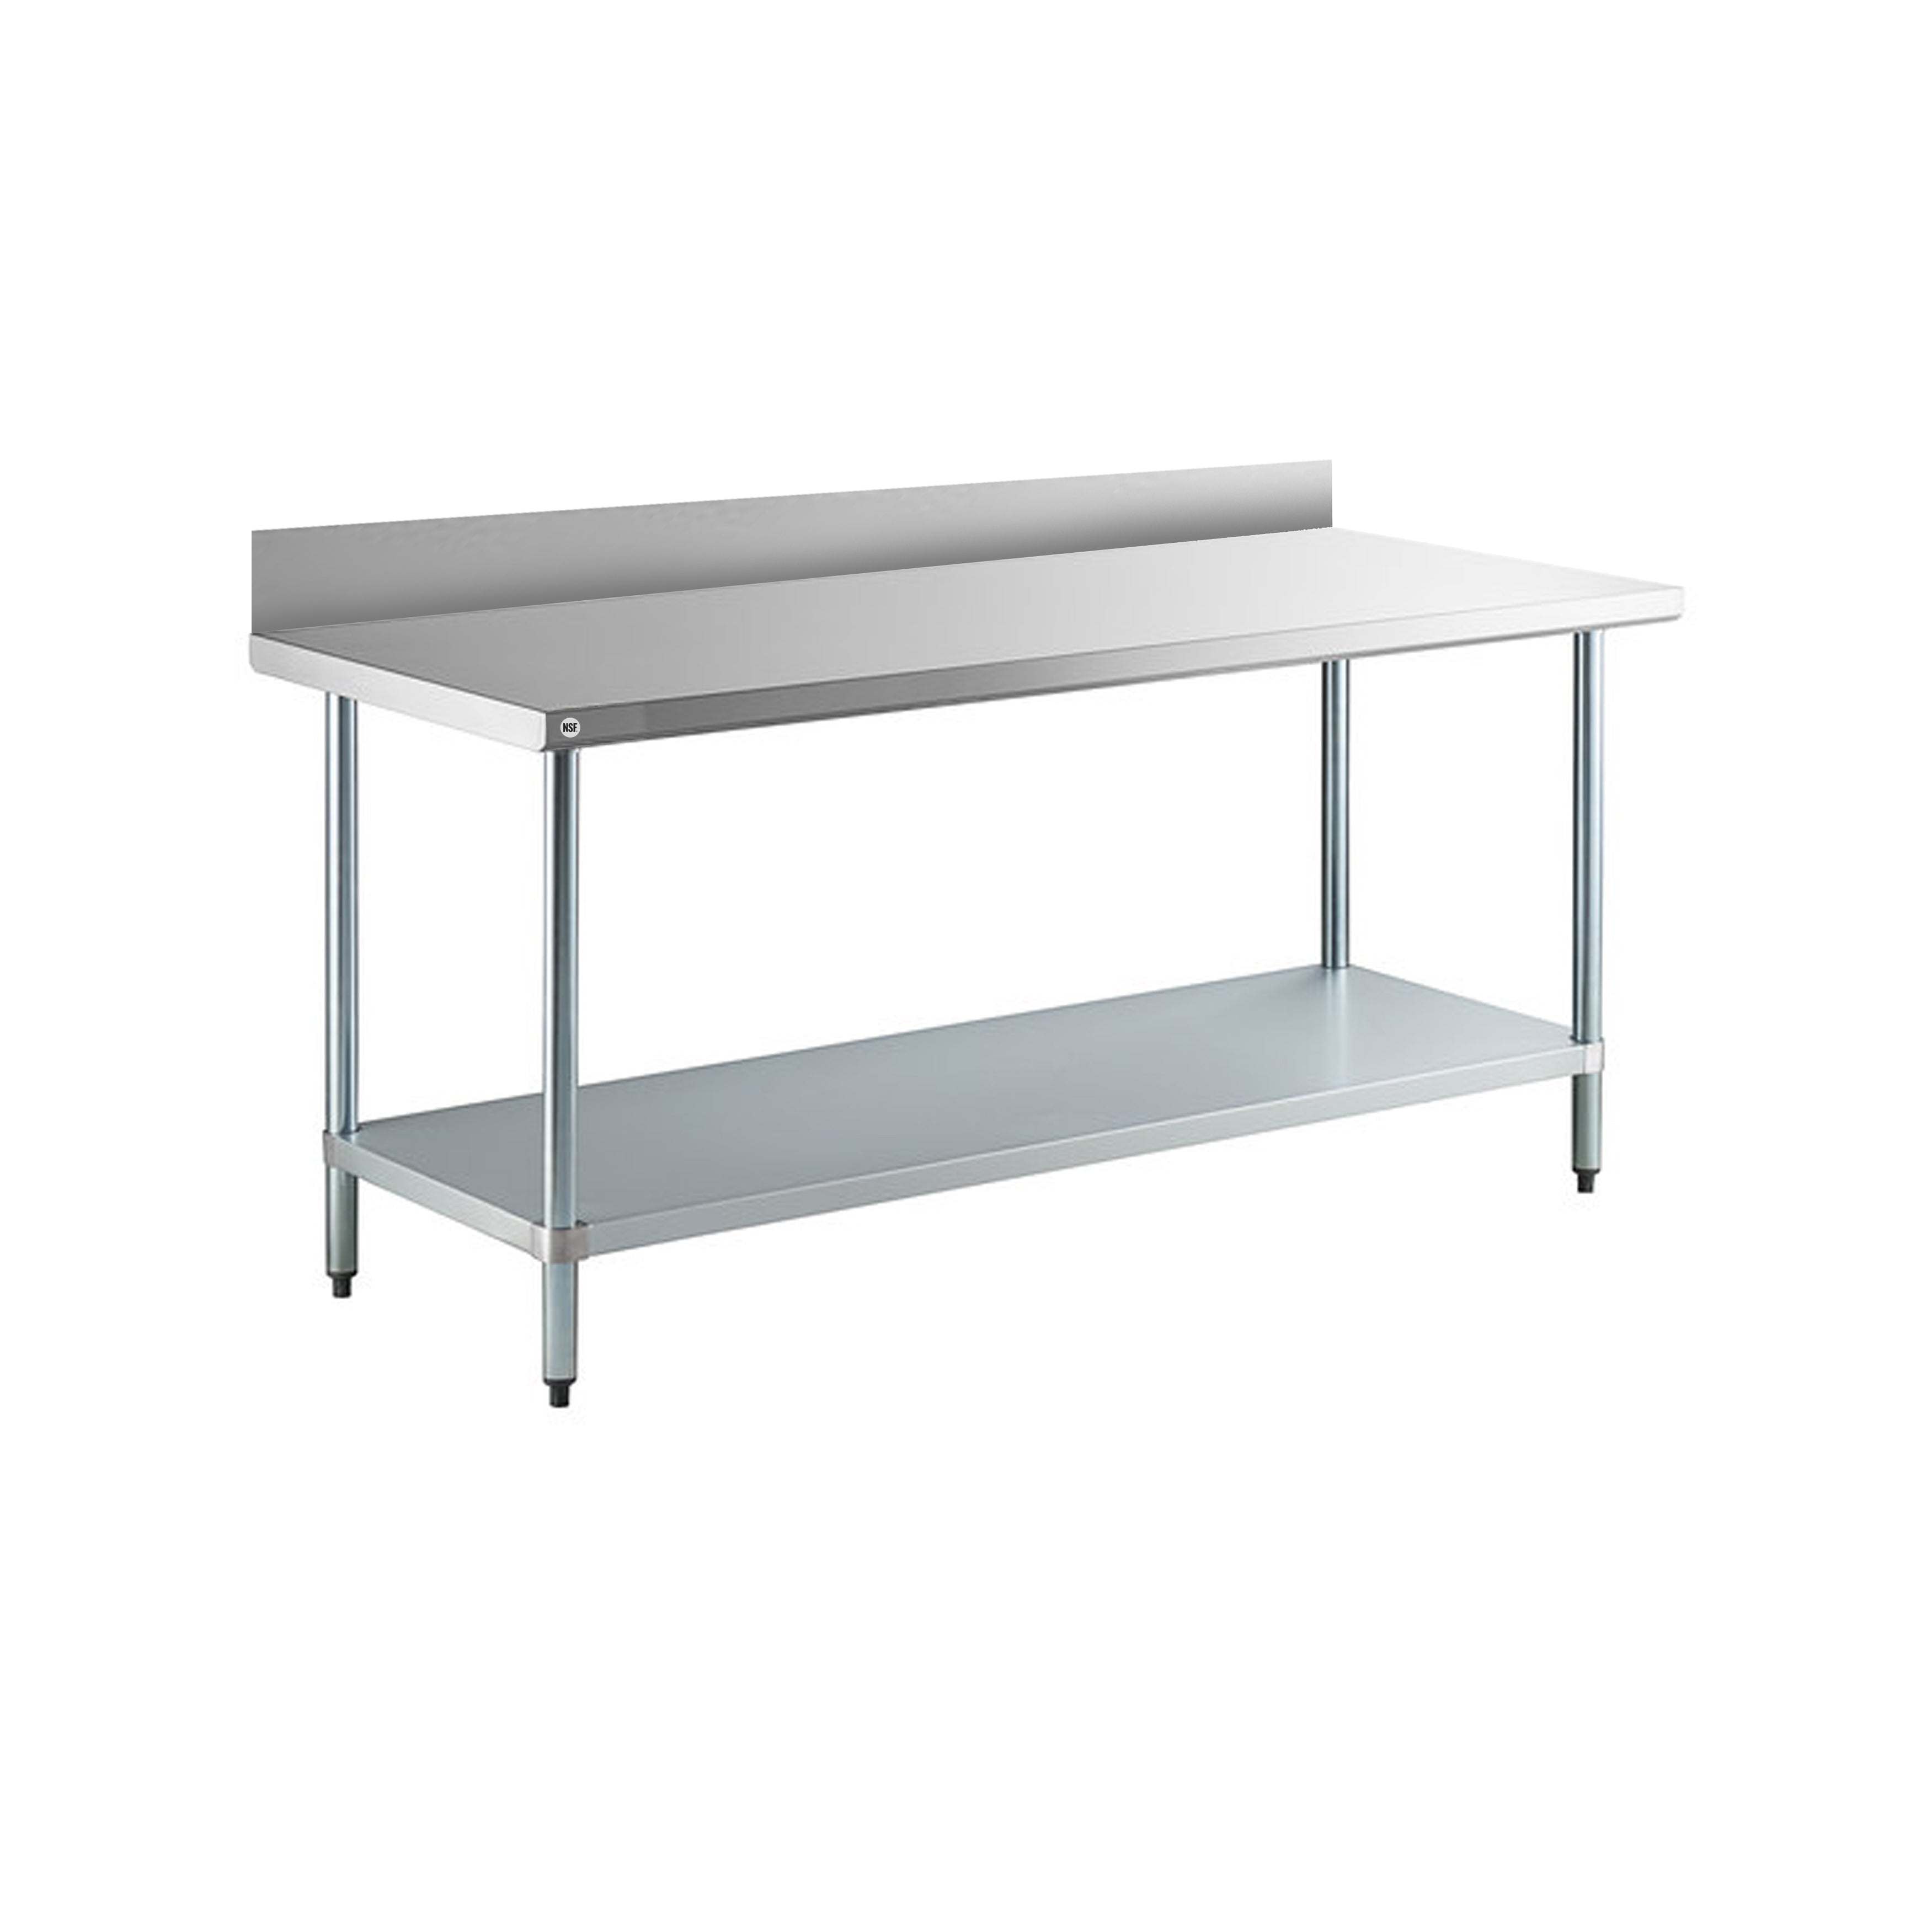 Omcan - 22079, Commercial 24" x 30" Stainless Steel Kitchen Work Table with 4" BackSplash 800lbs Light Duty